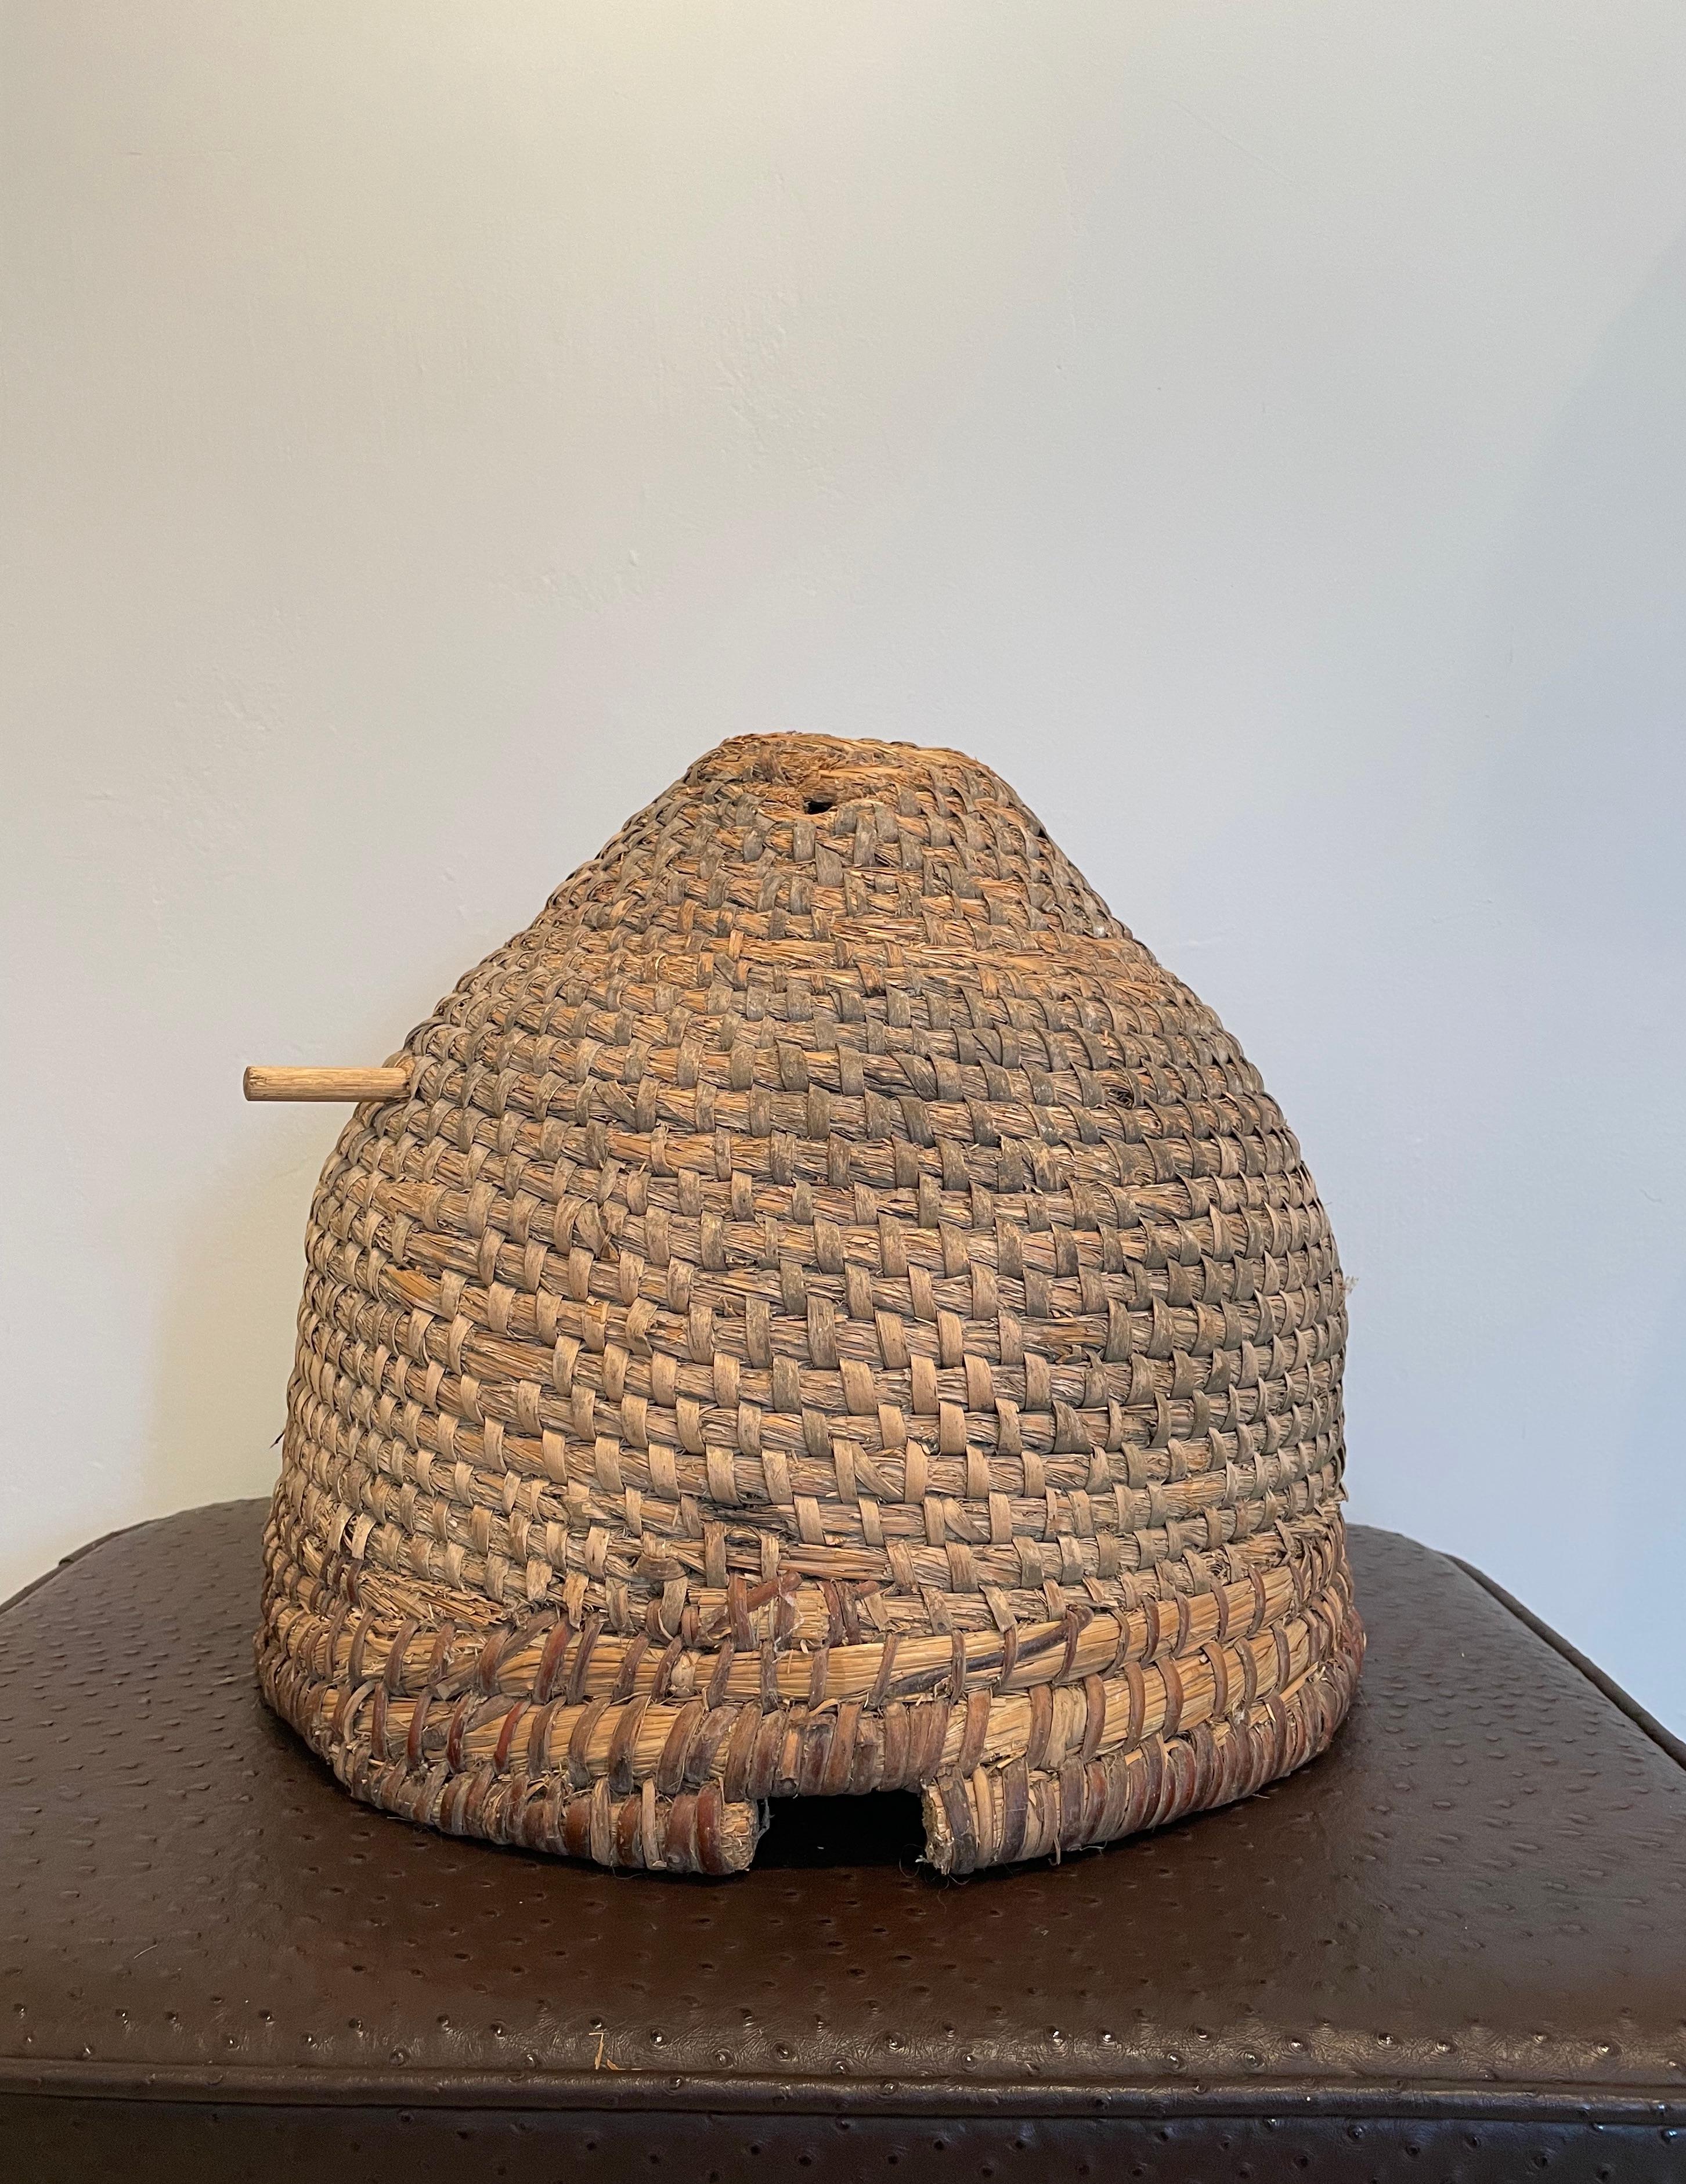 A bee skep is a traditional round hive made of straw or dried grass. Multiple strands of straw are bundled together to form a thick rope and the rope is then coiled and bound together to make the skep.

The word skep is thought to have come from an